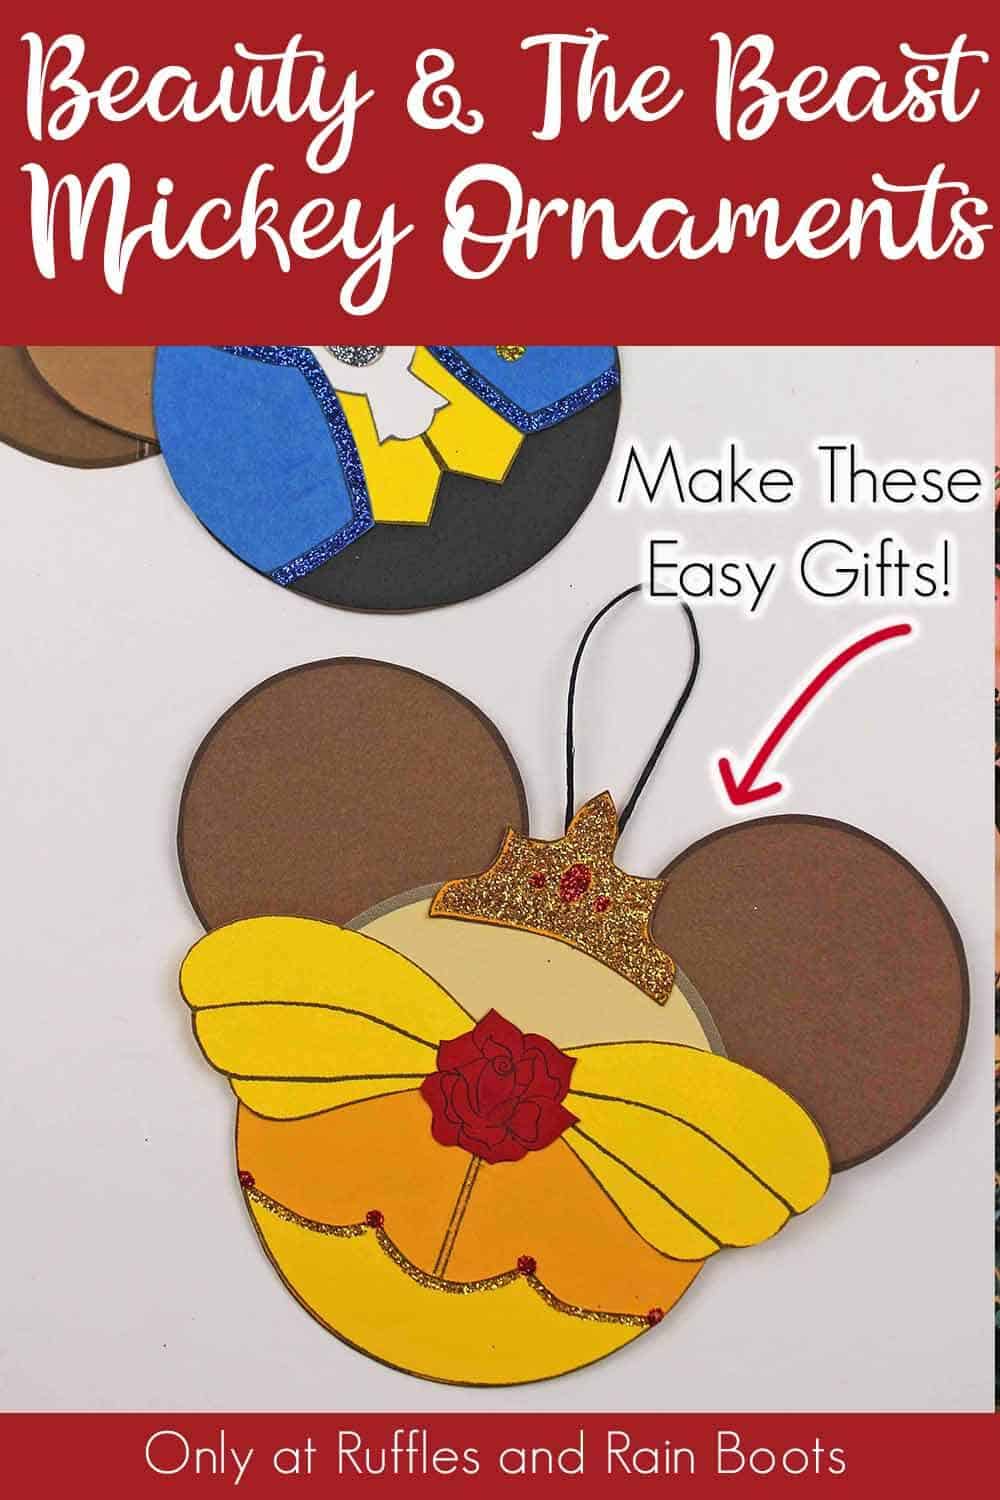 princess belle and beast christmas ornaments on a white backgroundwith text which reads beauty and the beast mickey ornaments make these easy gifts